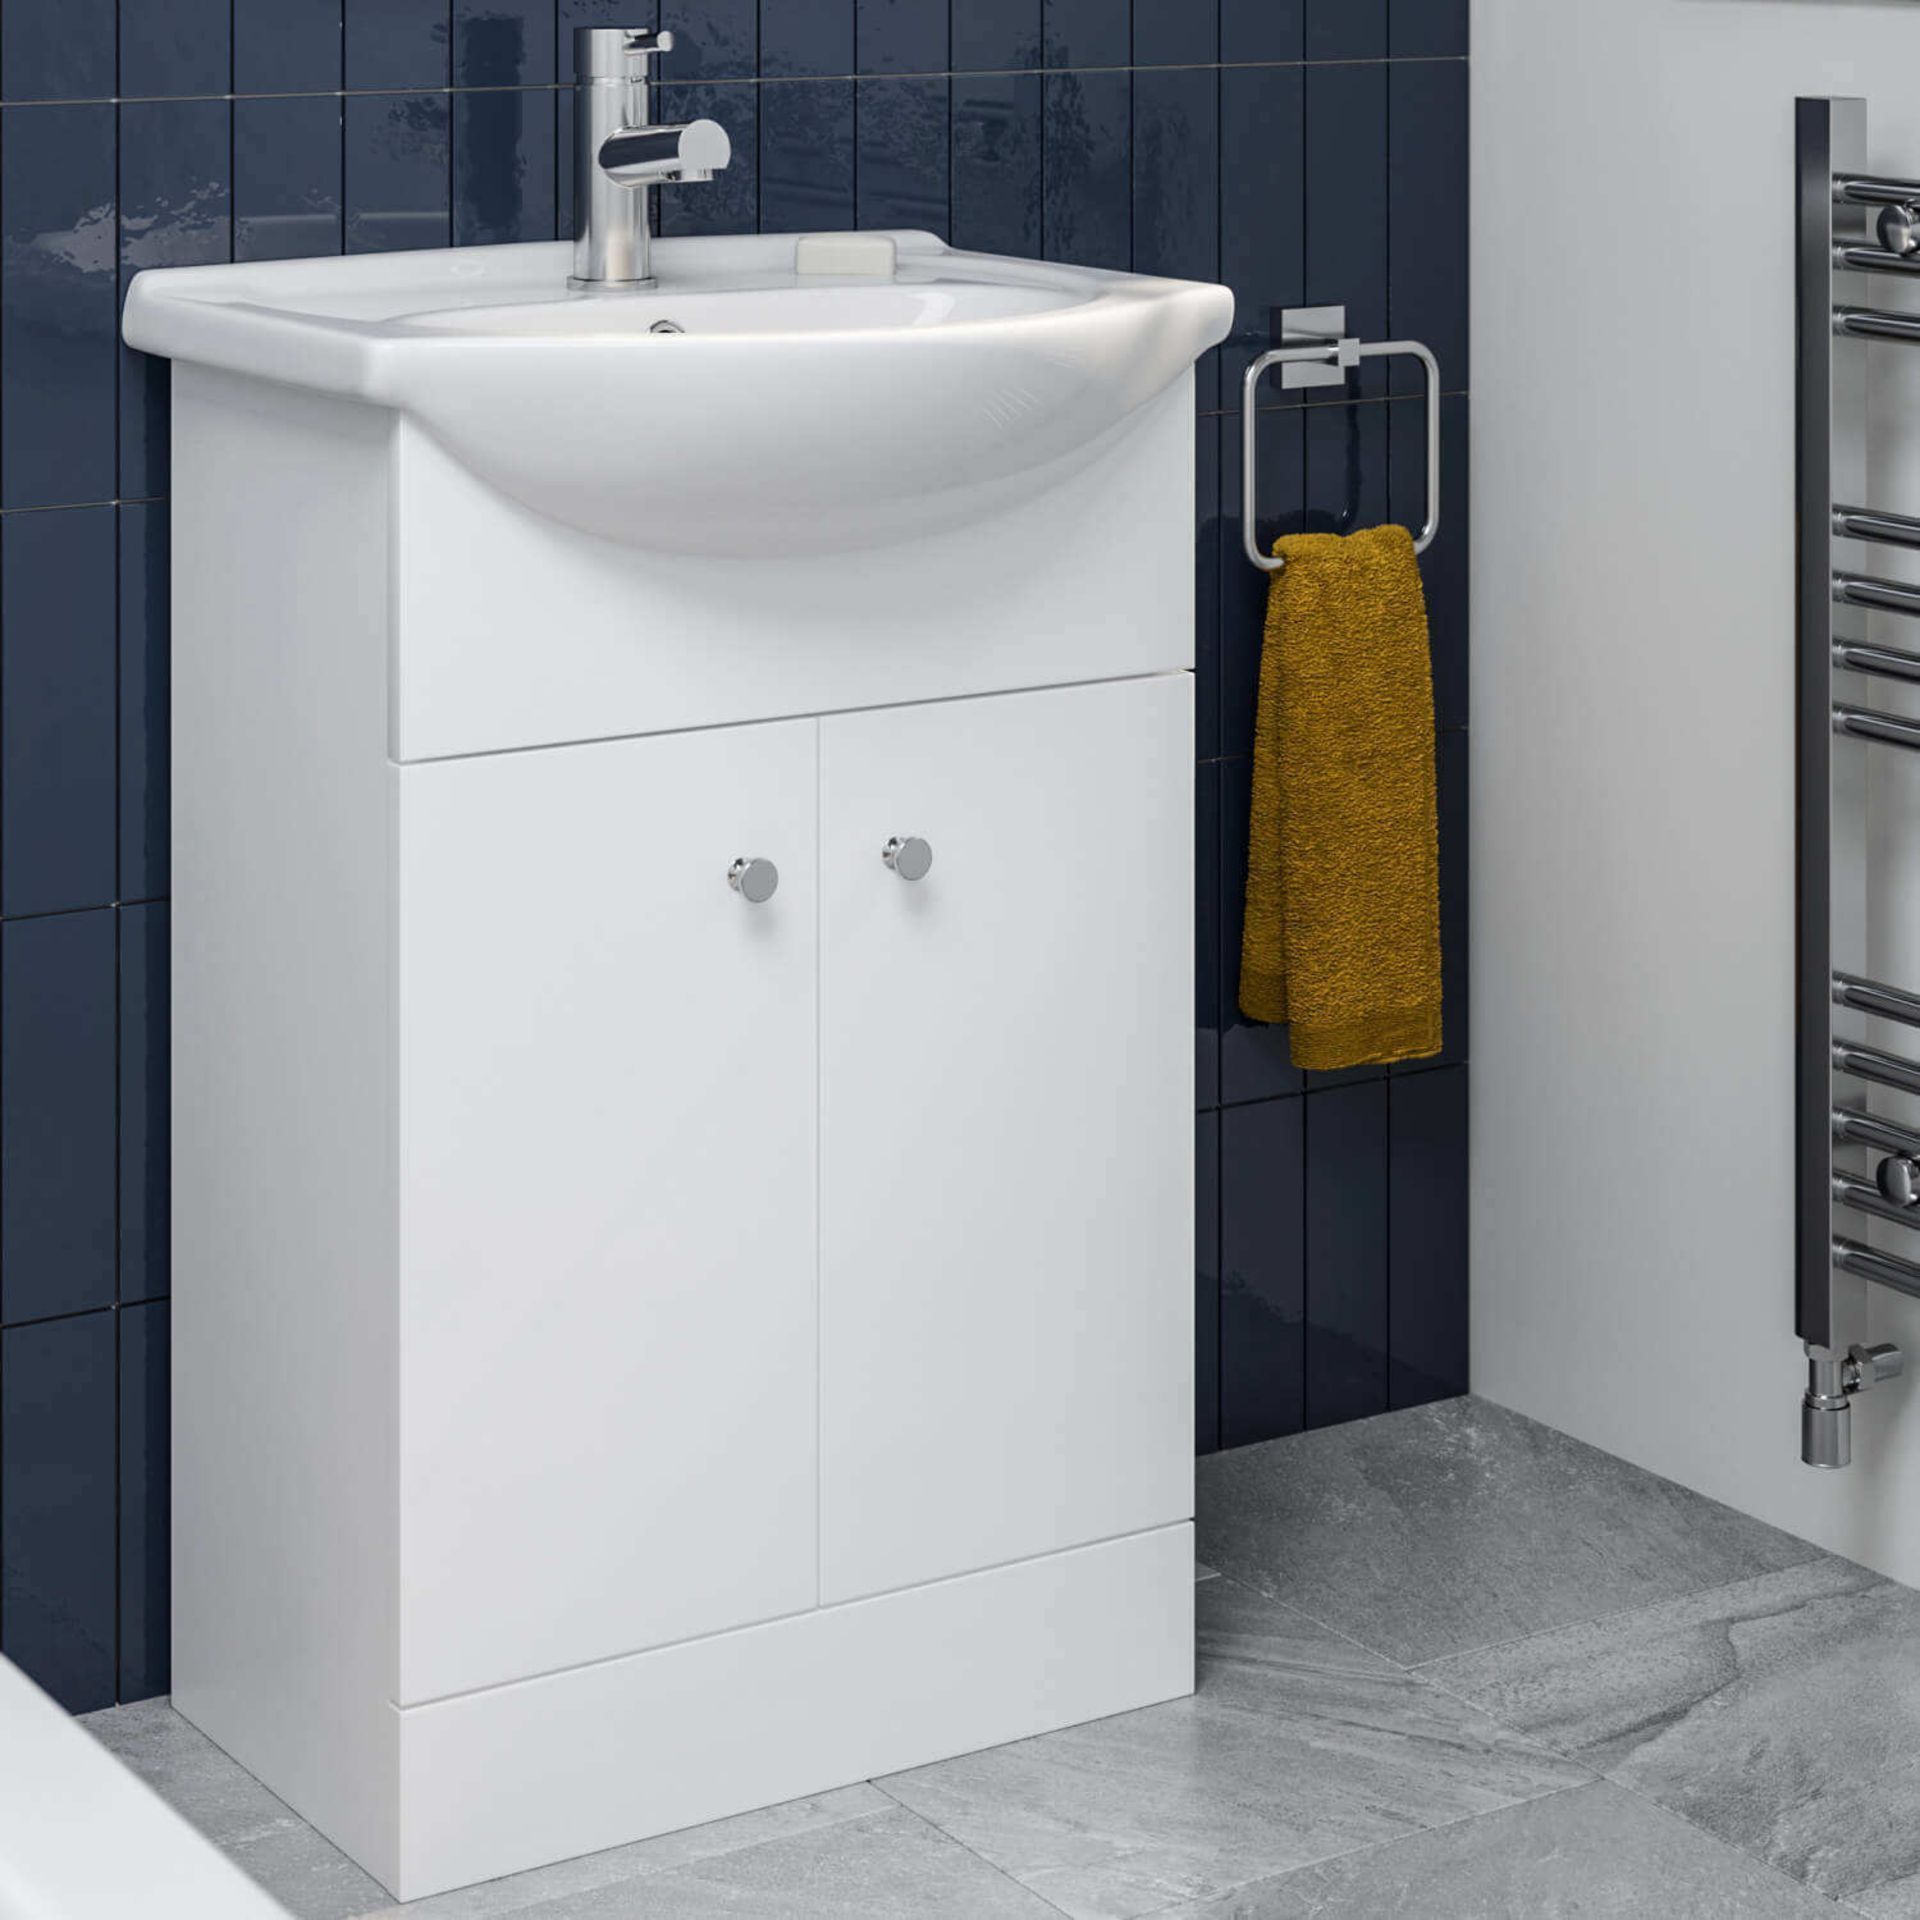 PALLET TO CONTAIN 8 X BRAND NEW BOXED 550mm Quartz Basin Sink Vanity Unit Floor Standing White. - Image 2 of 3